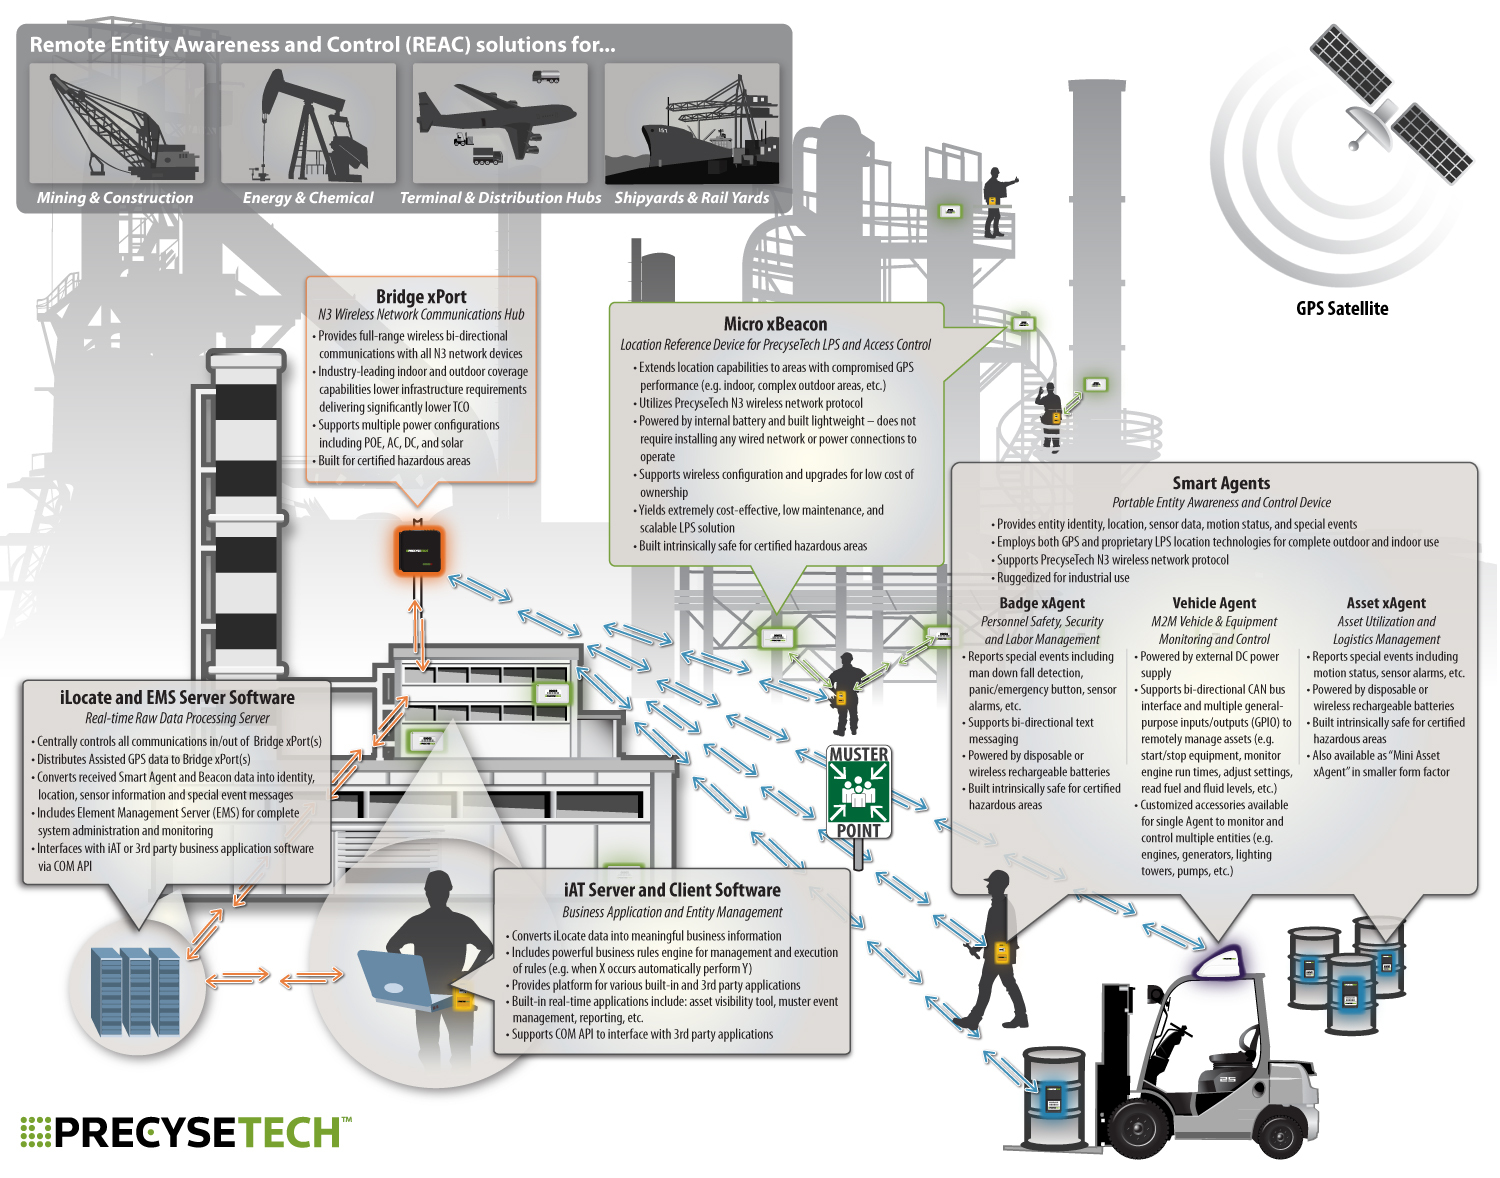 PrecyseTech™ Leverages RFID and GPS to Deliver Machine-to-Machine (M2M) and  Internet of Things (IoT) Capabilities to Increase Operational Efficiencies  and Improve Safety in Oil and Gas, Mining and Logistics Industries